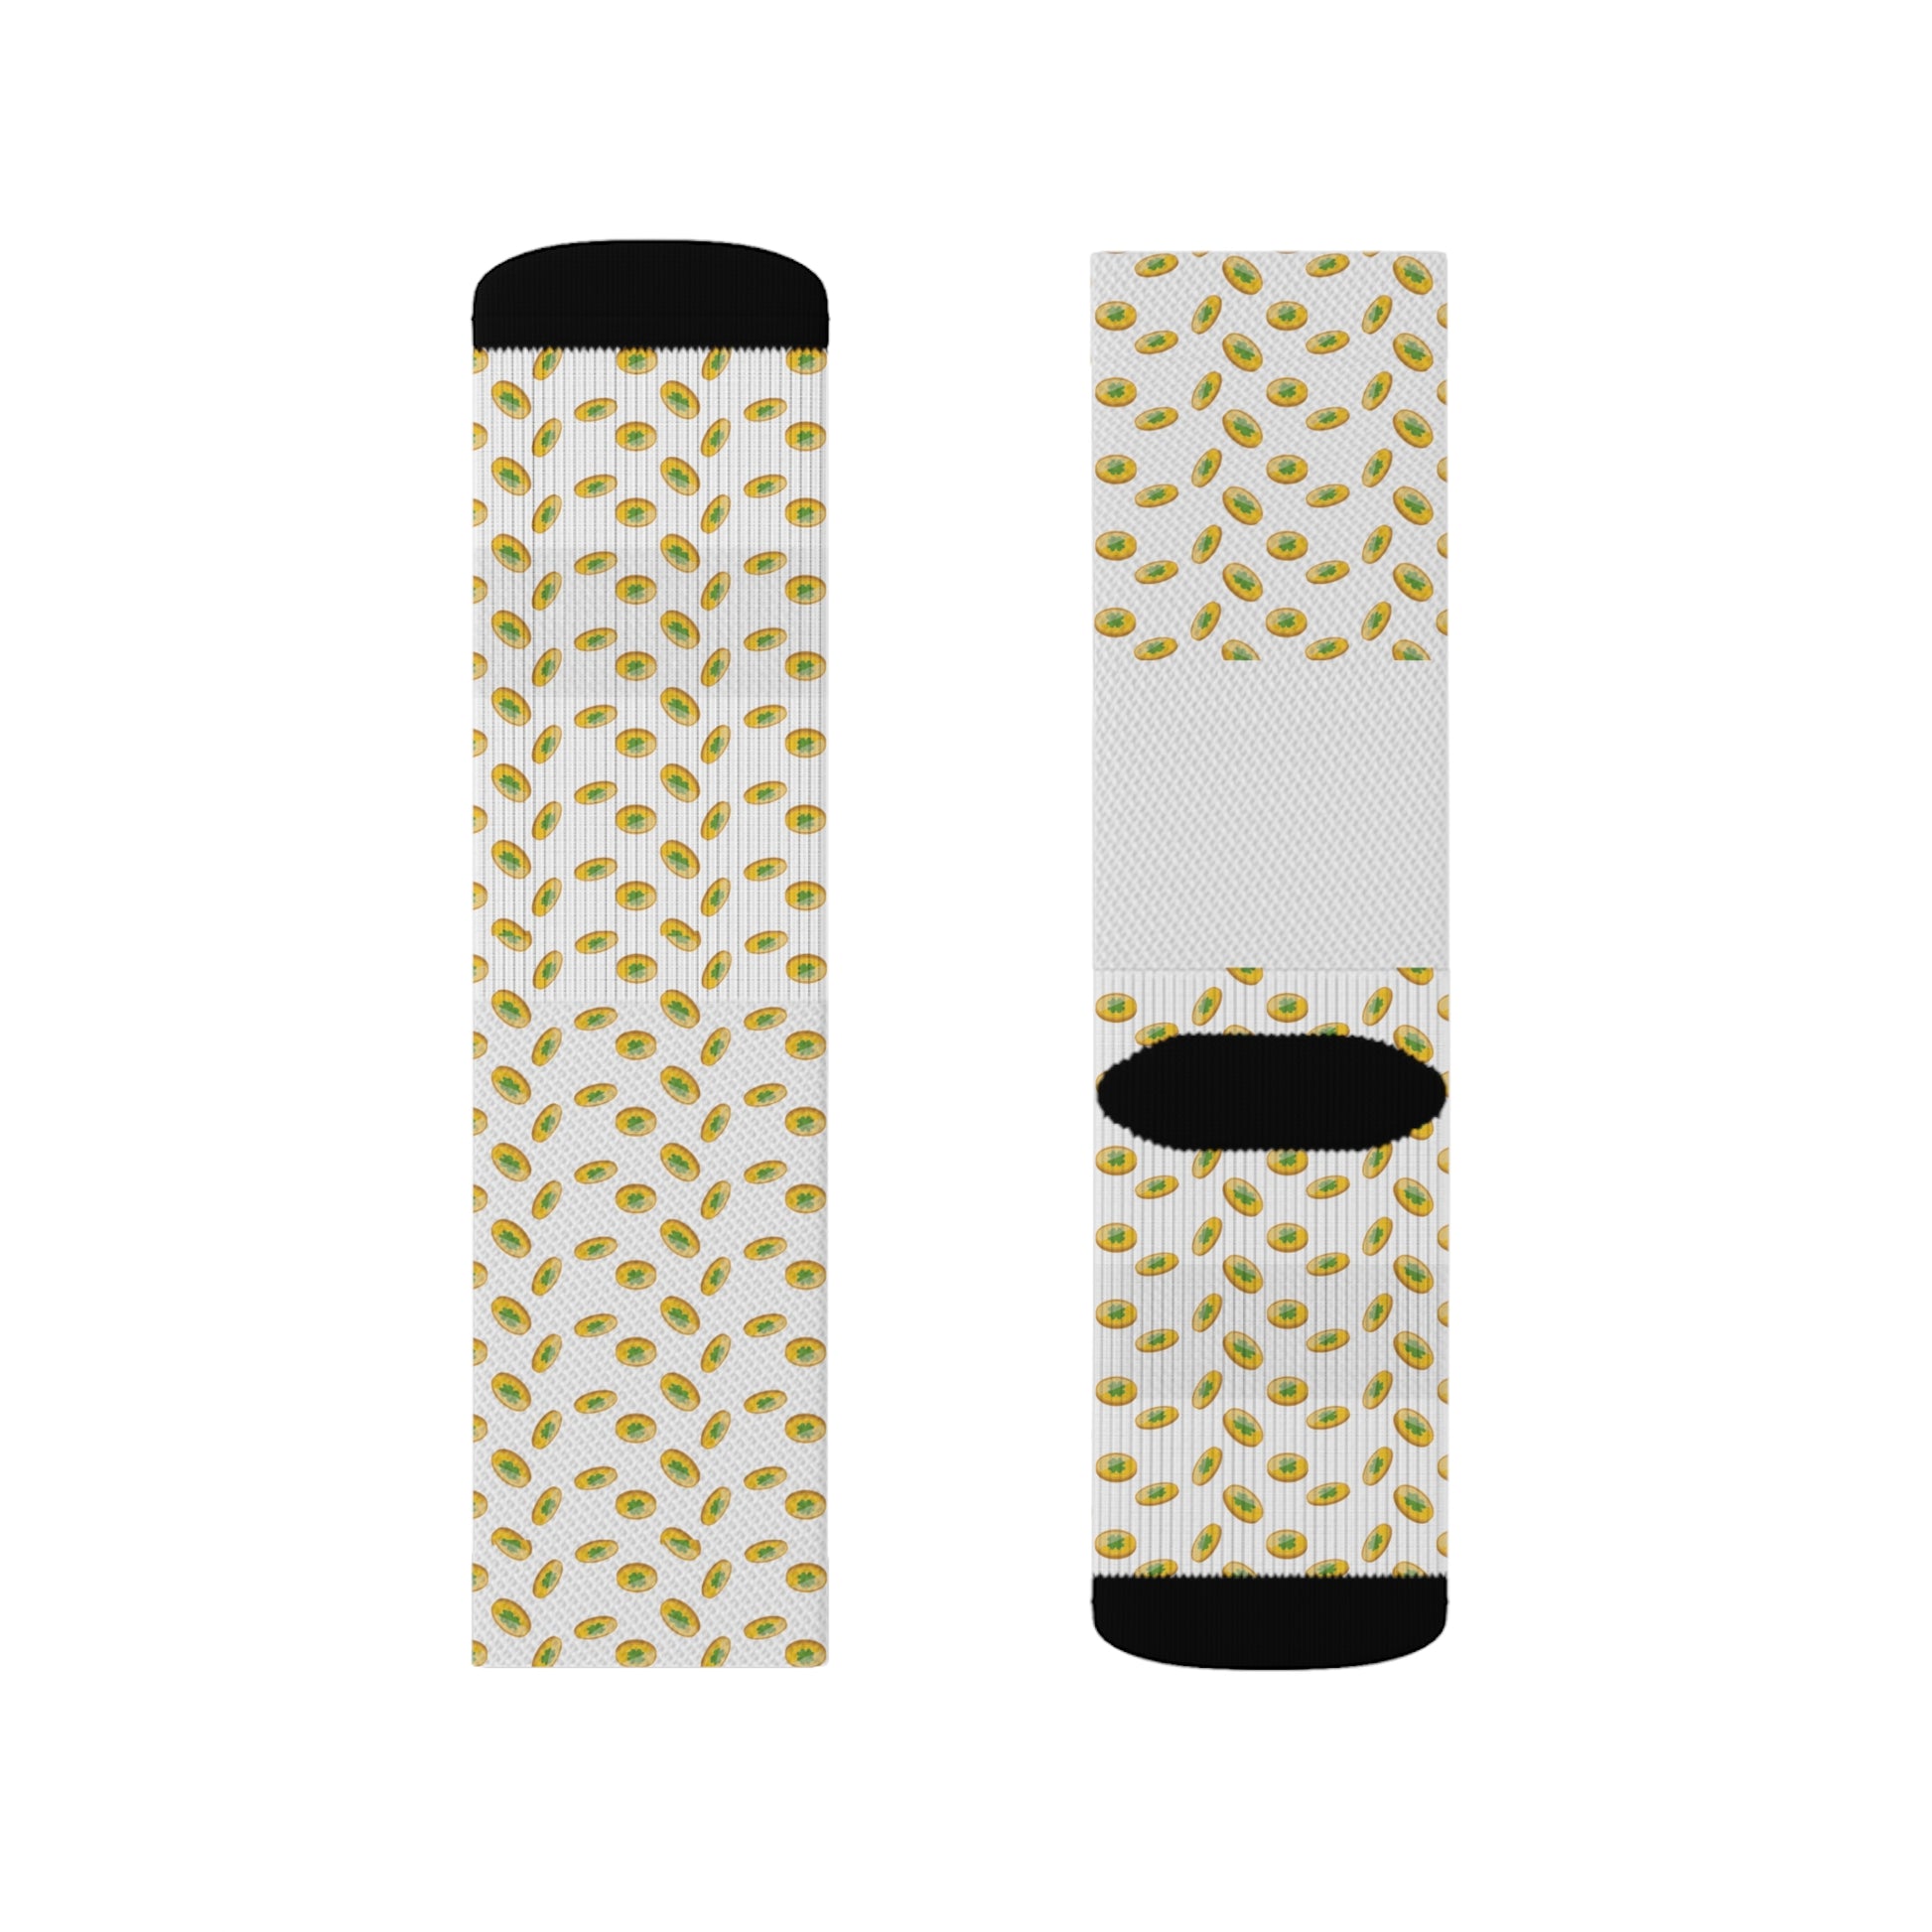 A pair of white and gold Printify socks with dots, perfect for St. Patrick's Day celebrations!